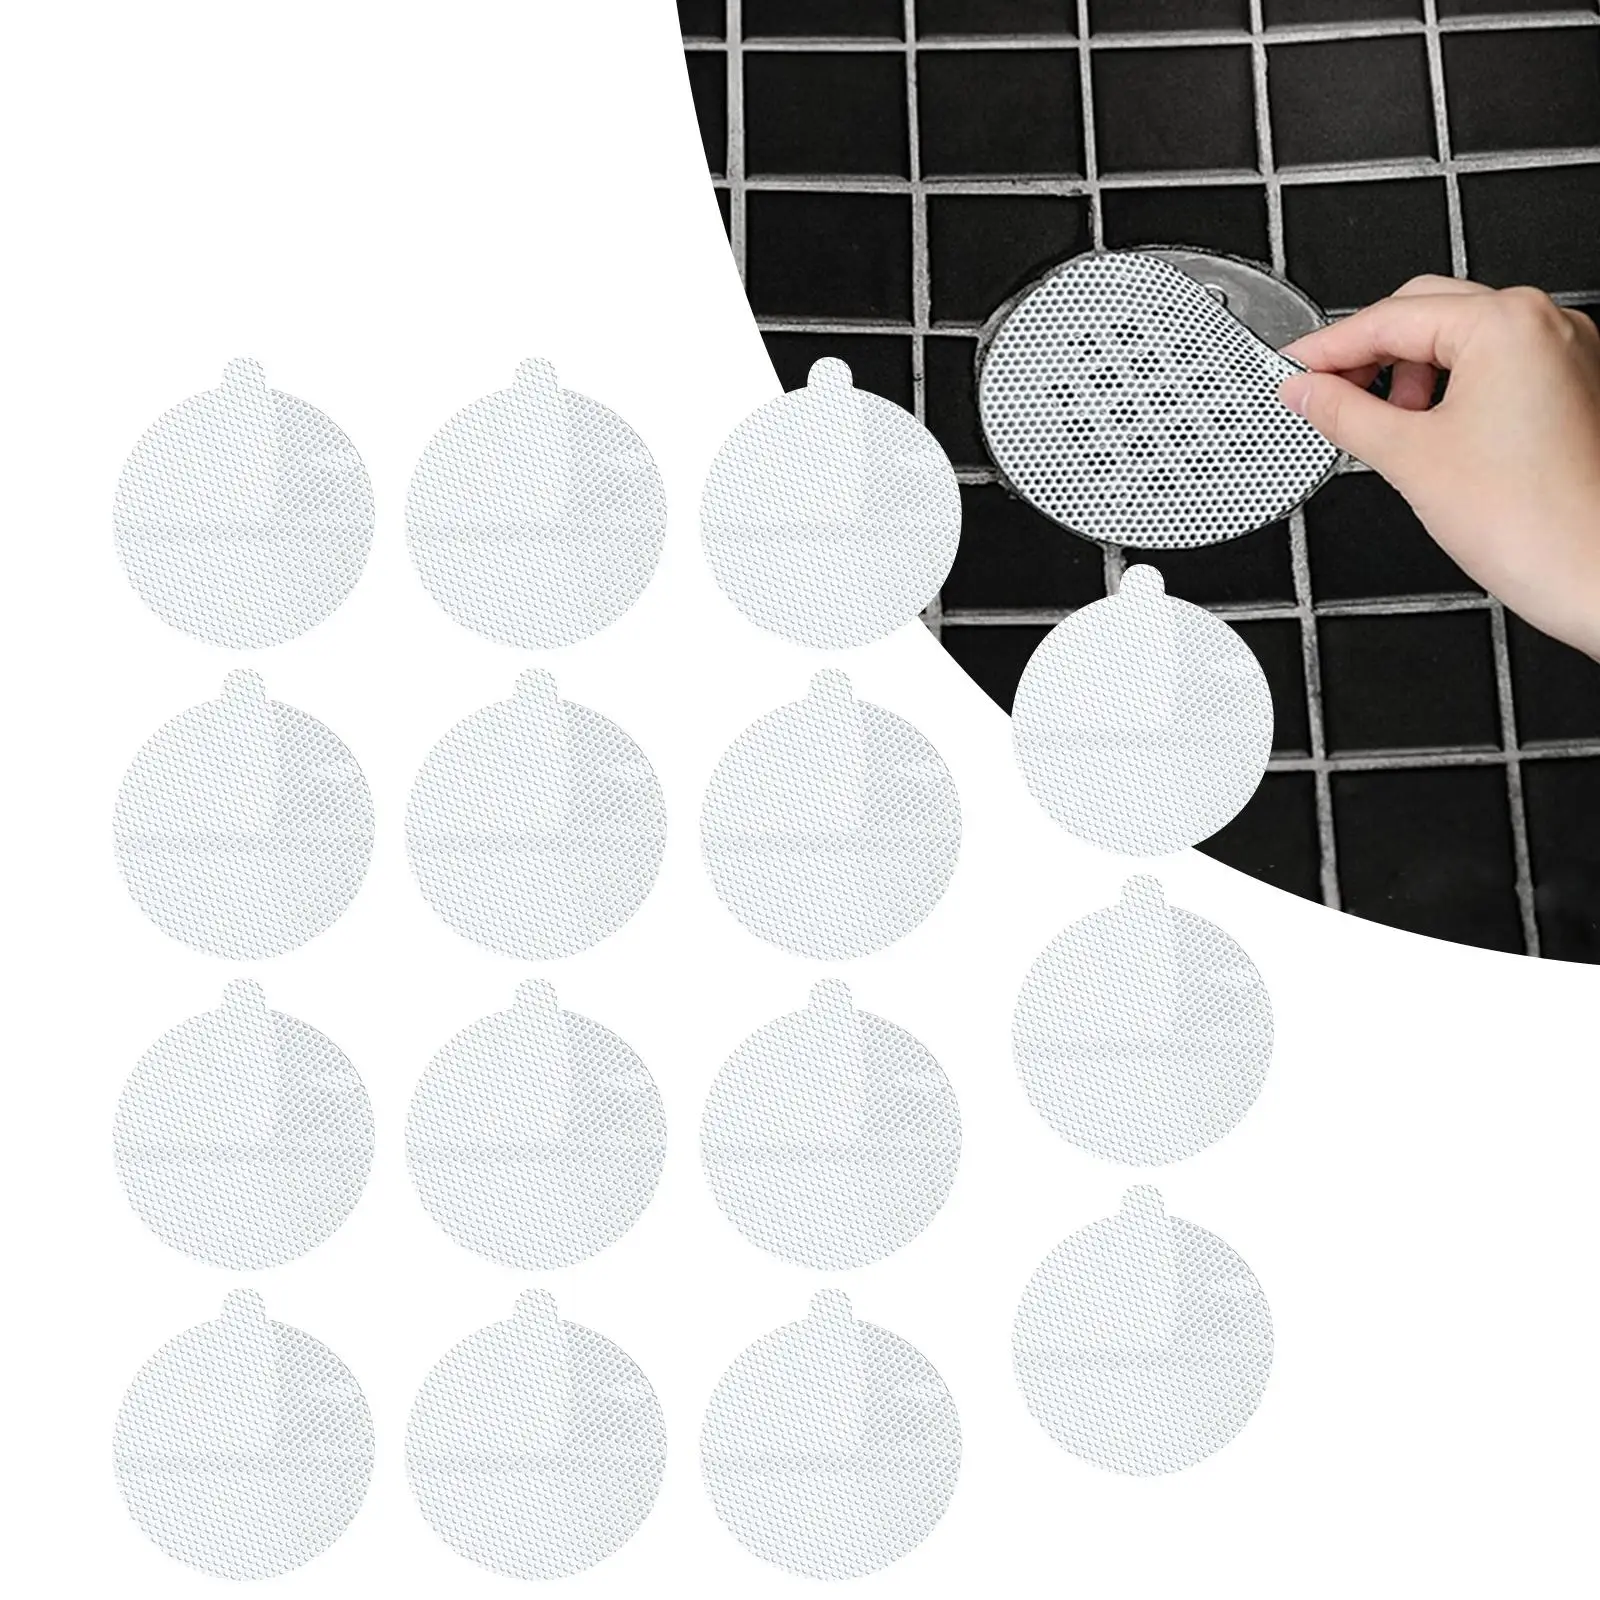 15 Pieces Round Disposable Shower Drain Catcher Collector Strainers Cover for Floor Drain Bathroom Sink Laundry Bathtub